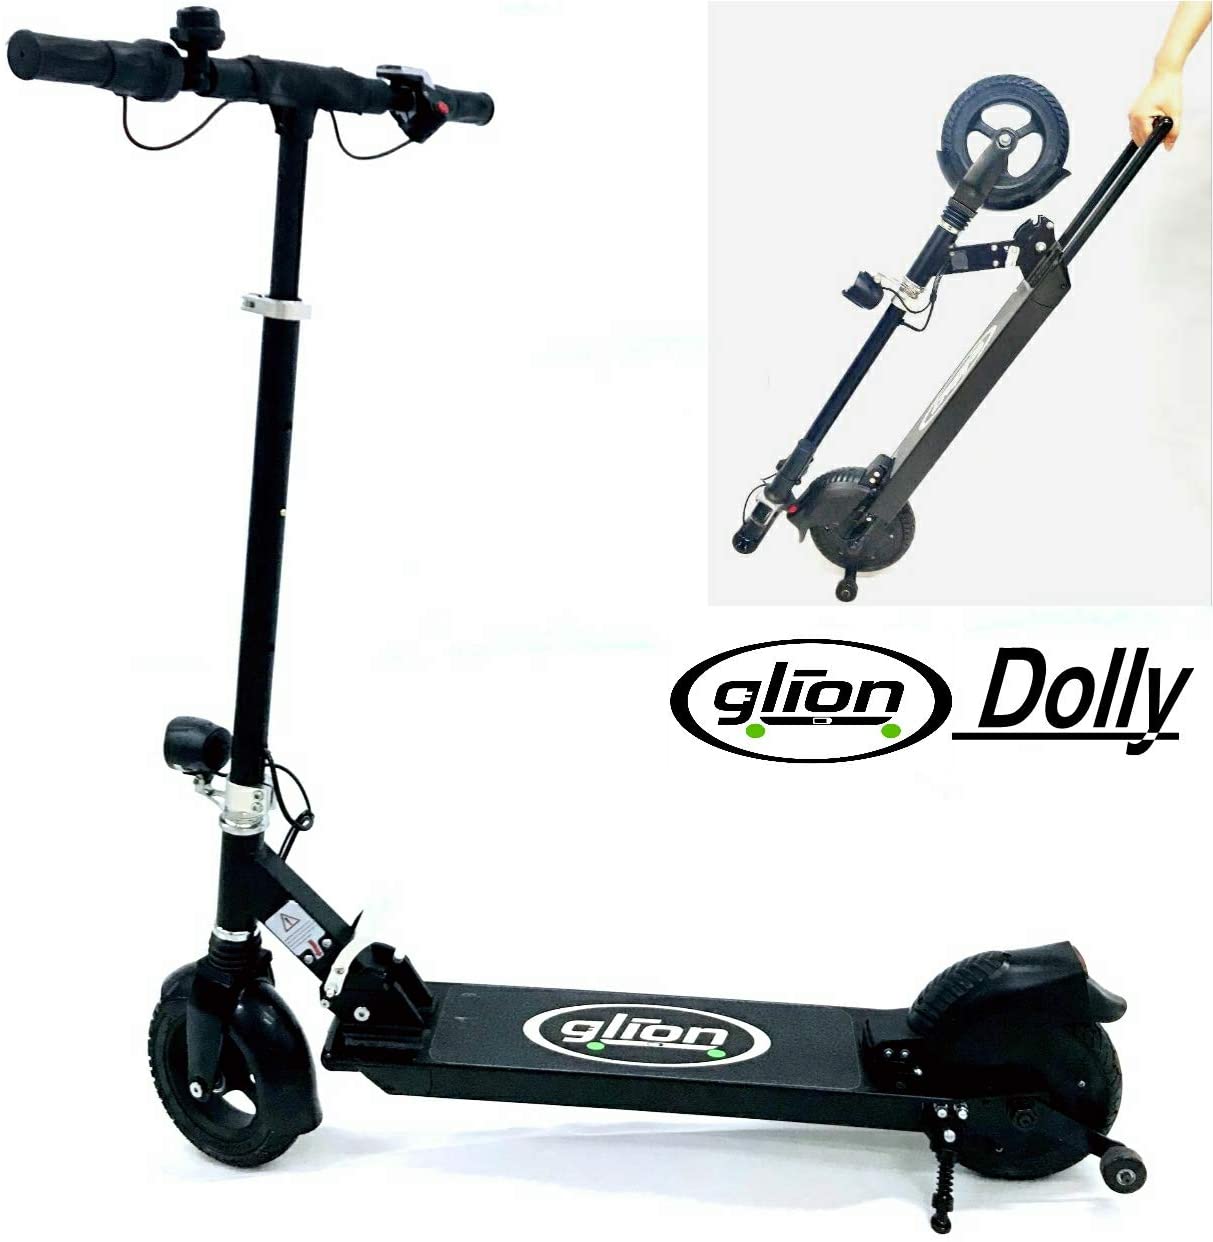 Glion Dolly (15 Mph) 500 Dollar Electric Scooter